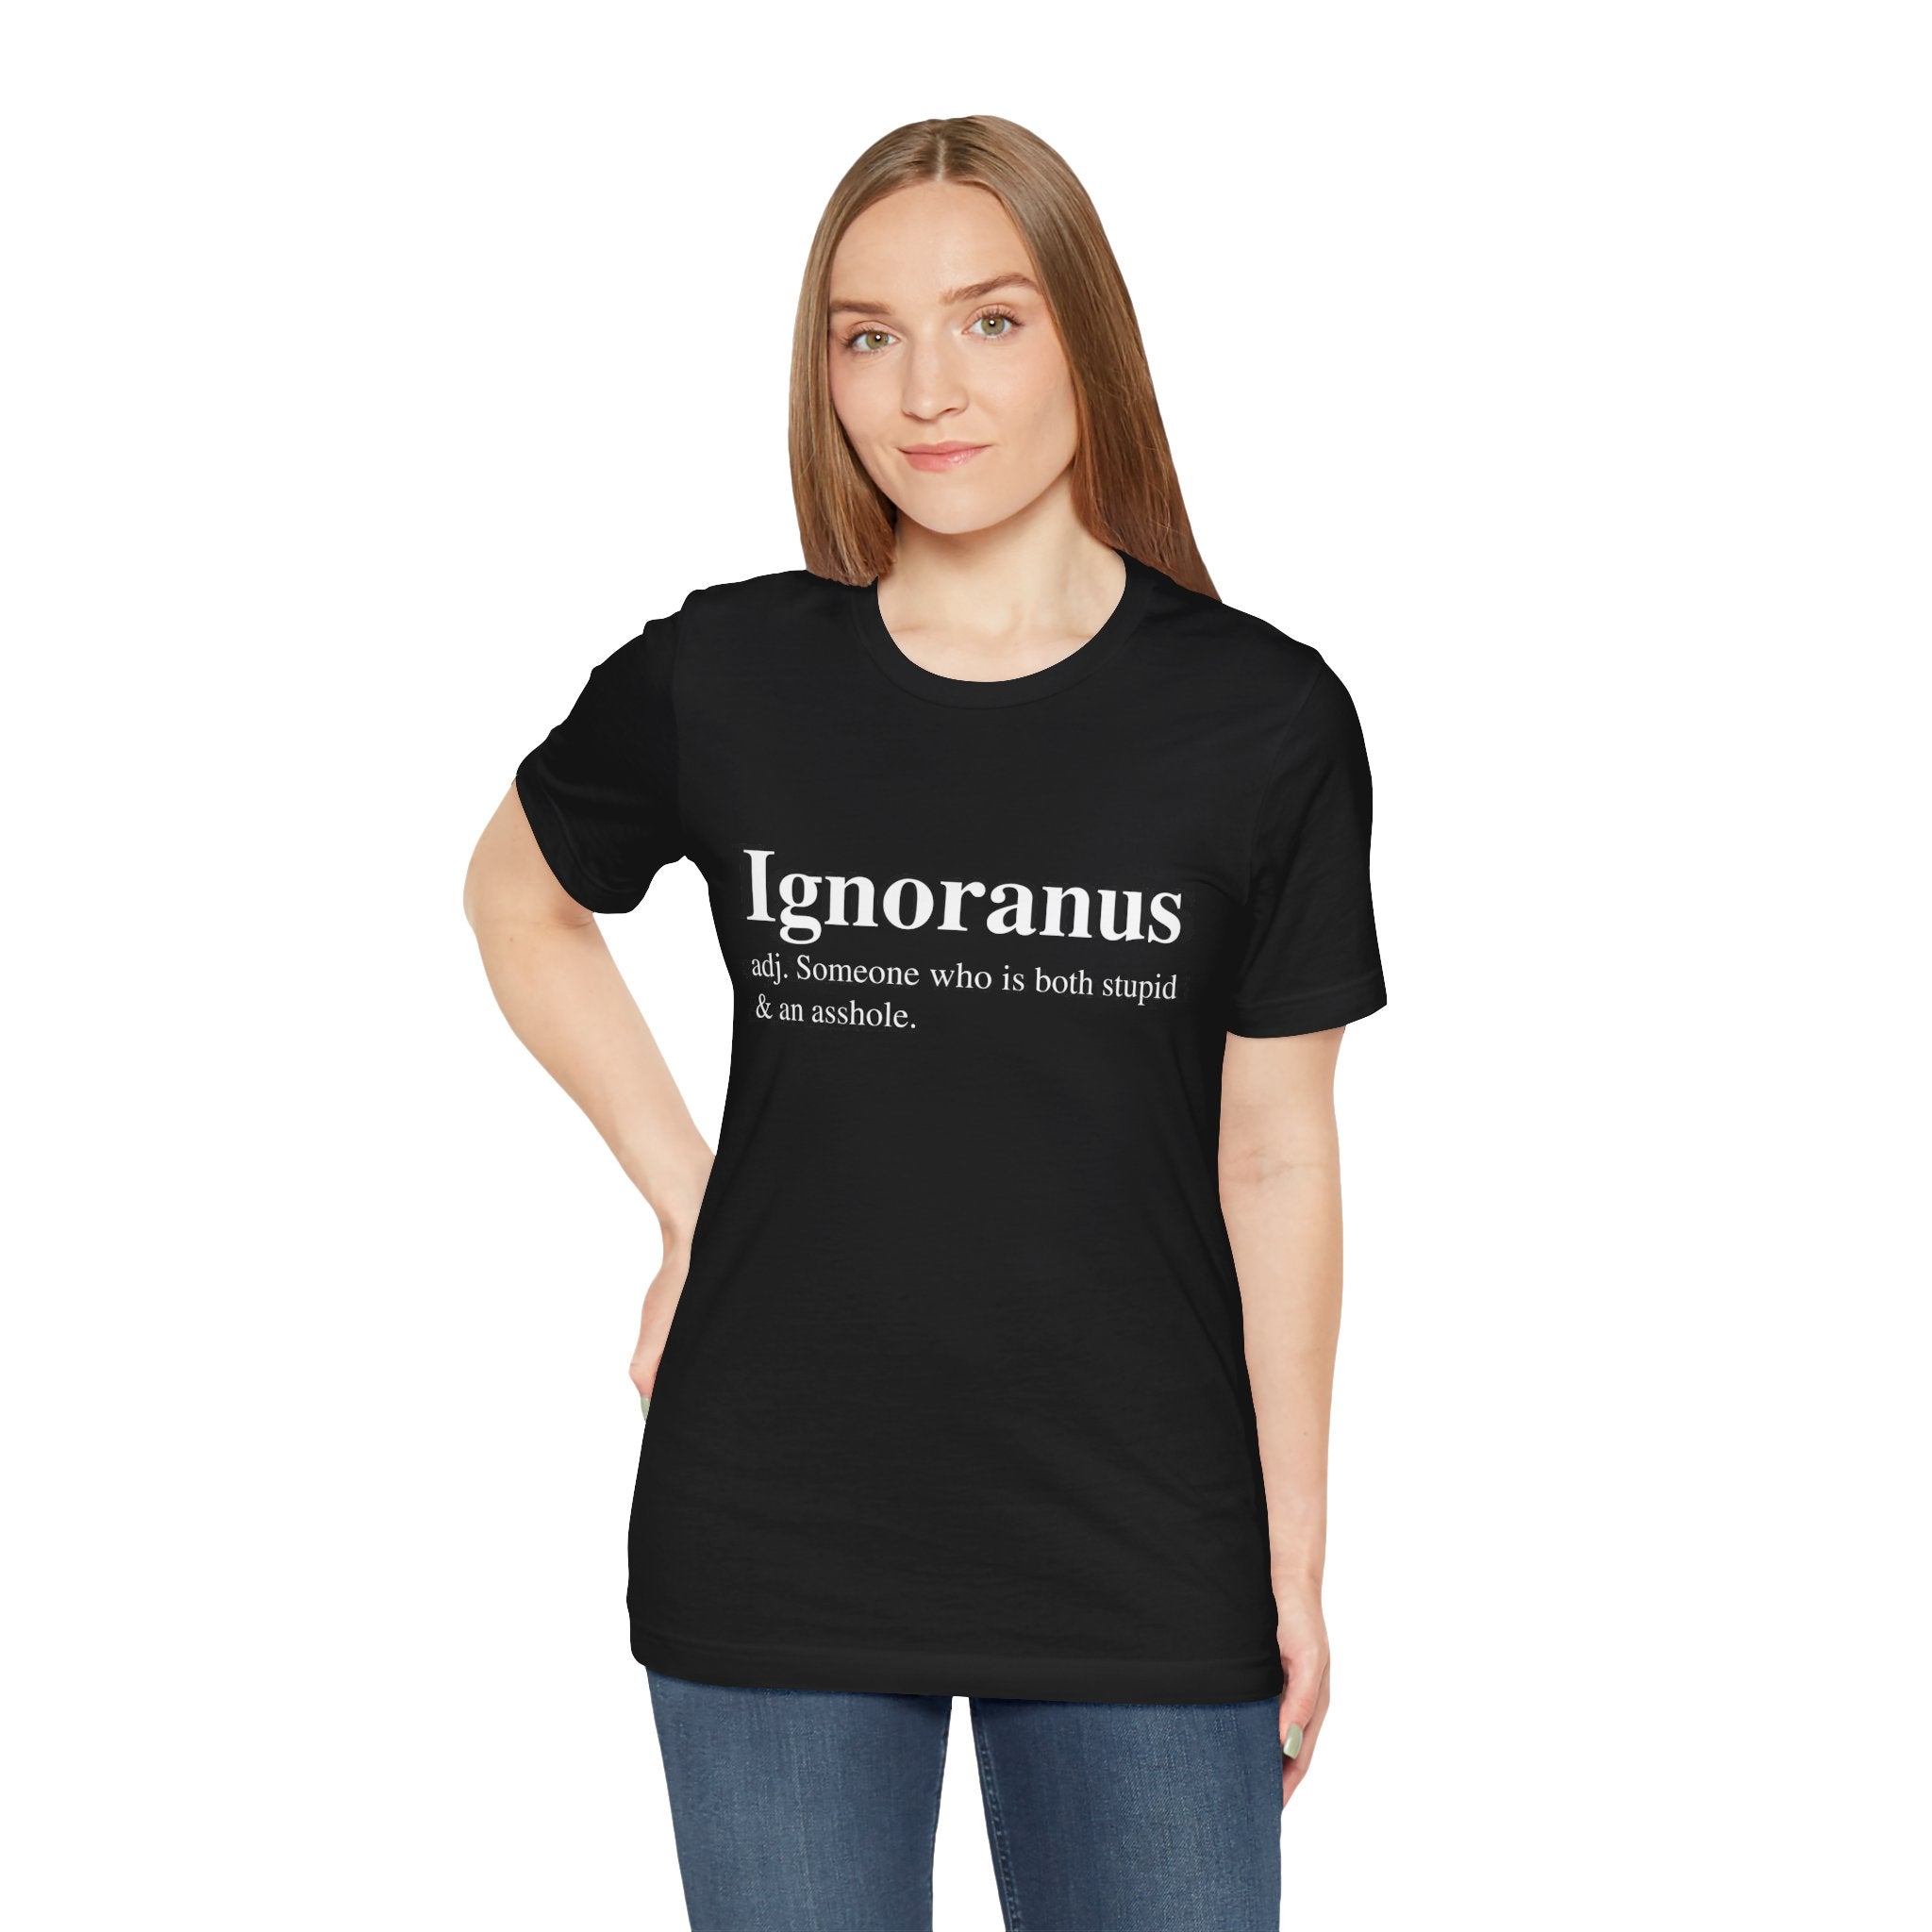 Young woman wearing an Ignoranus T-Shirt with the word "Ignoranus" and its humorous definition printed in white on soft cotton.